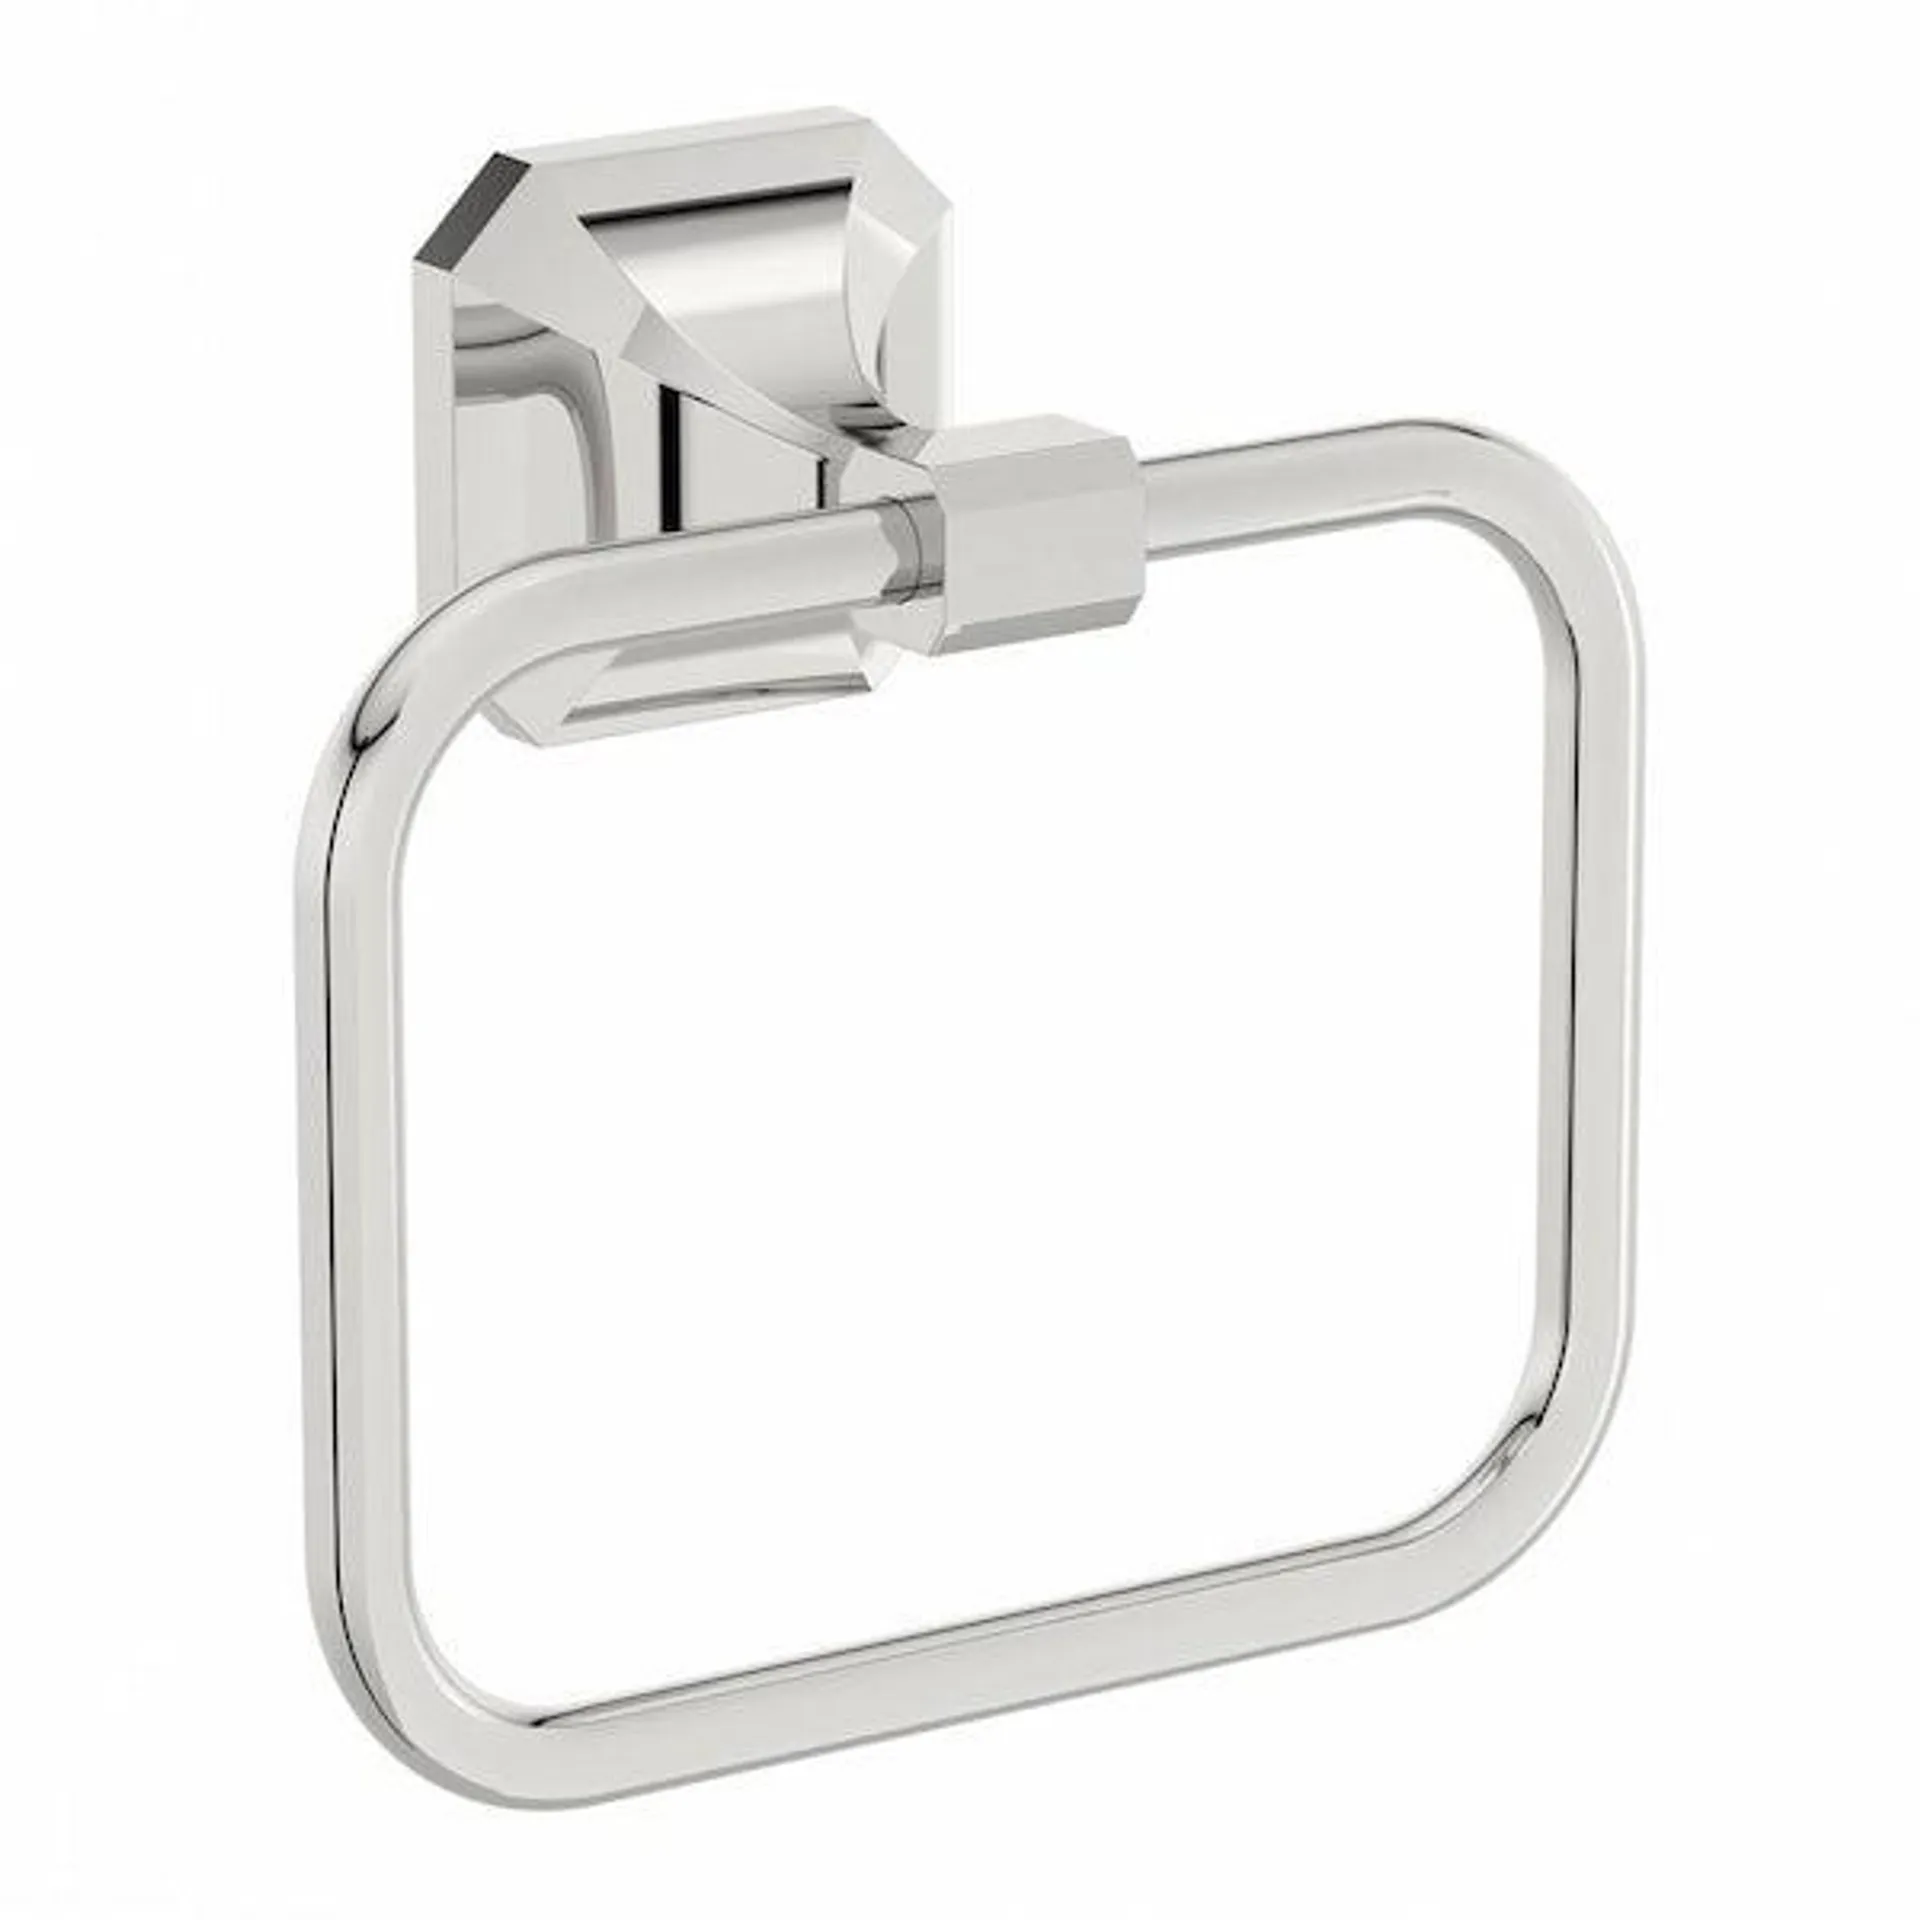 Accents Camberley square towel ring